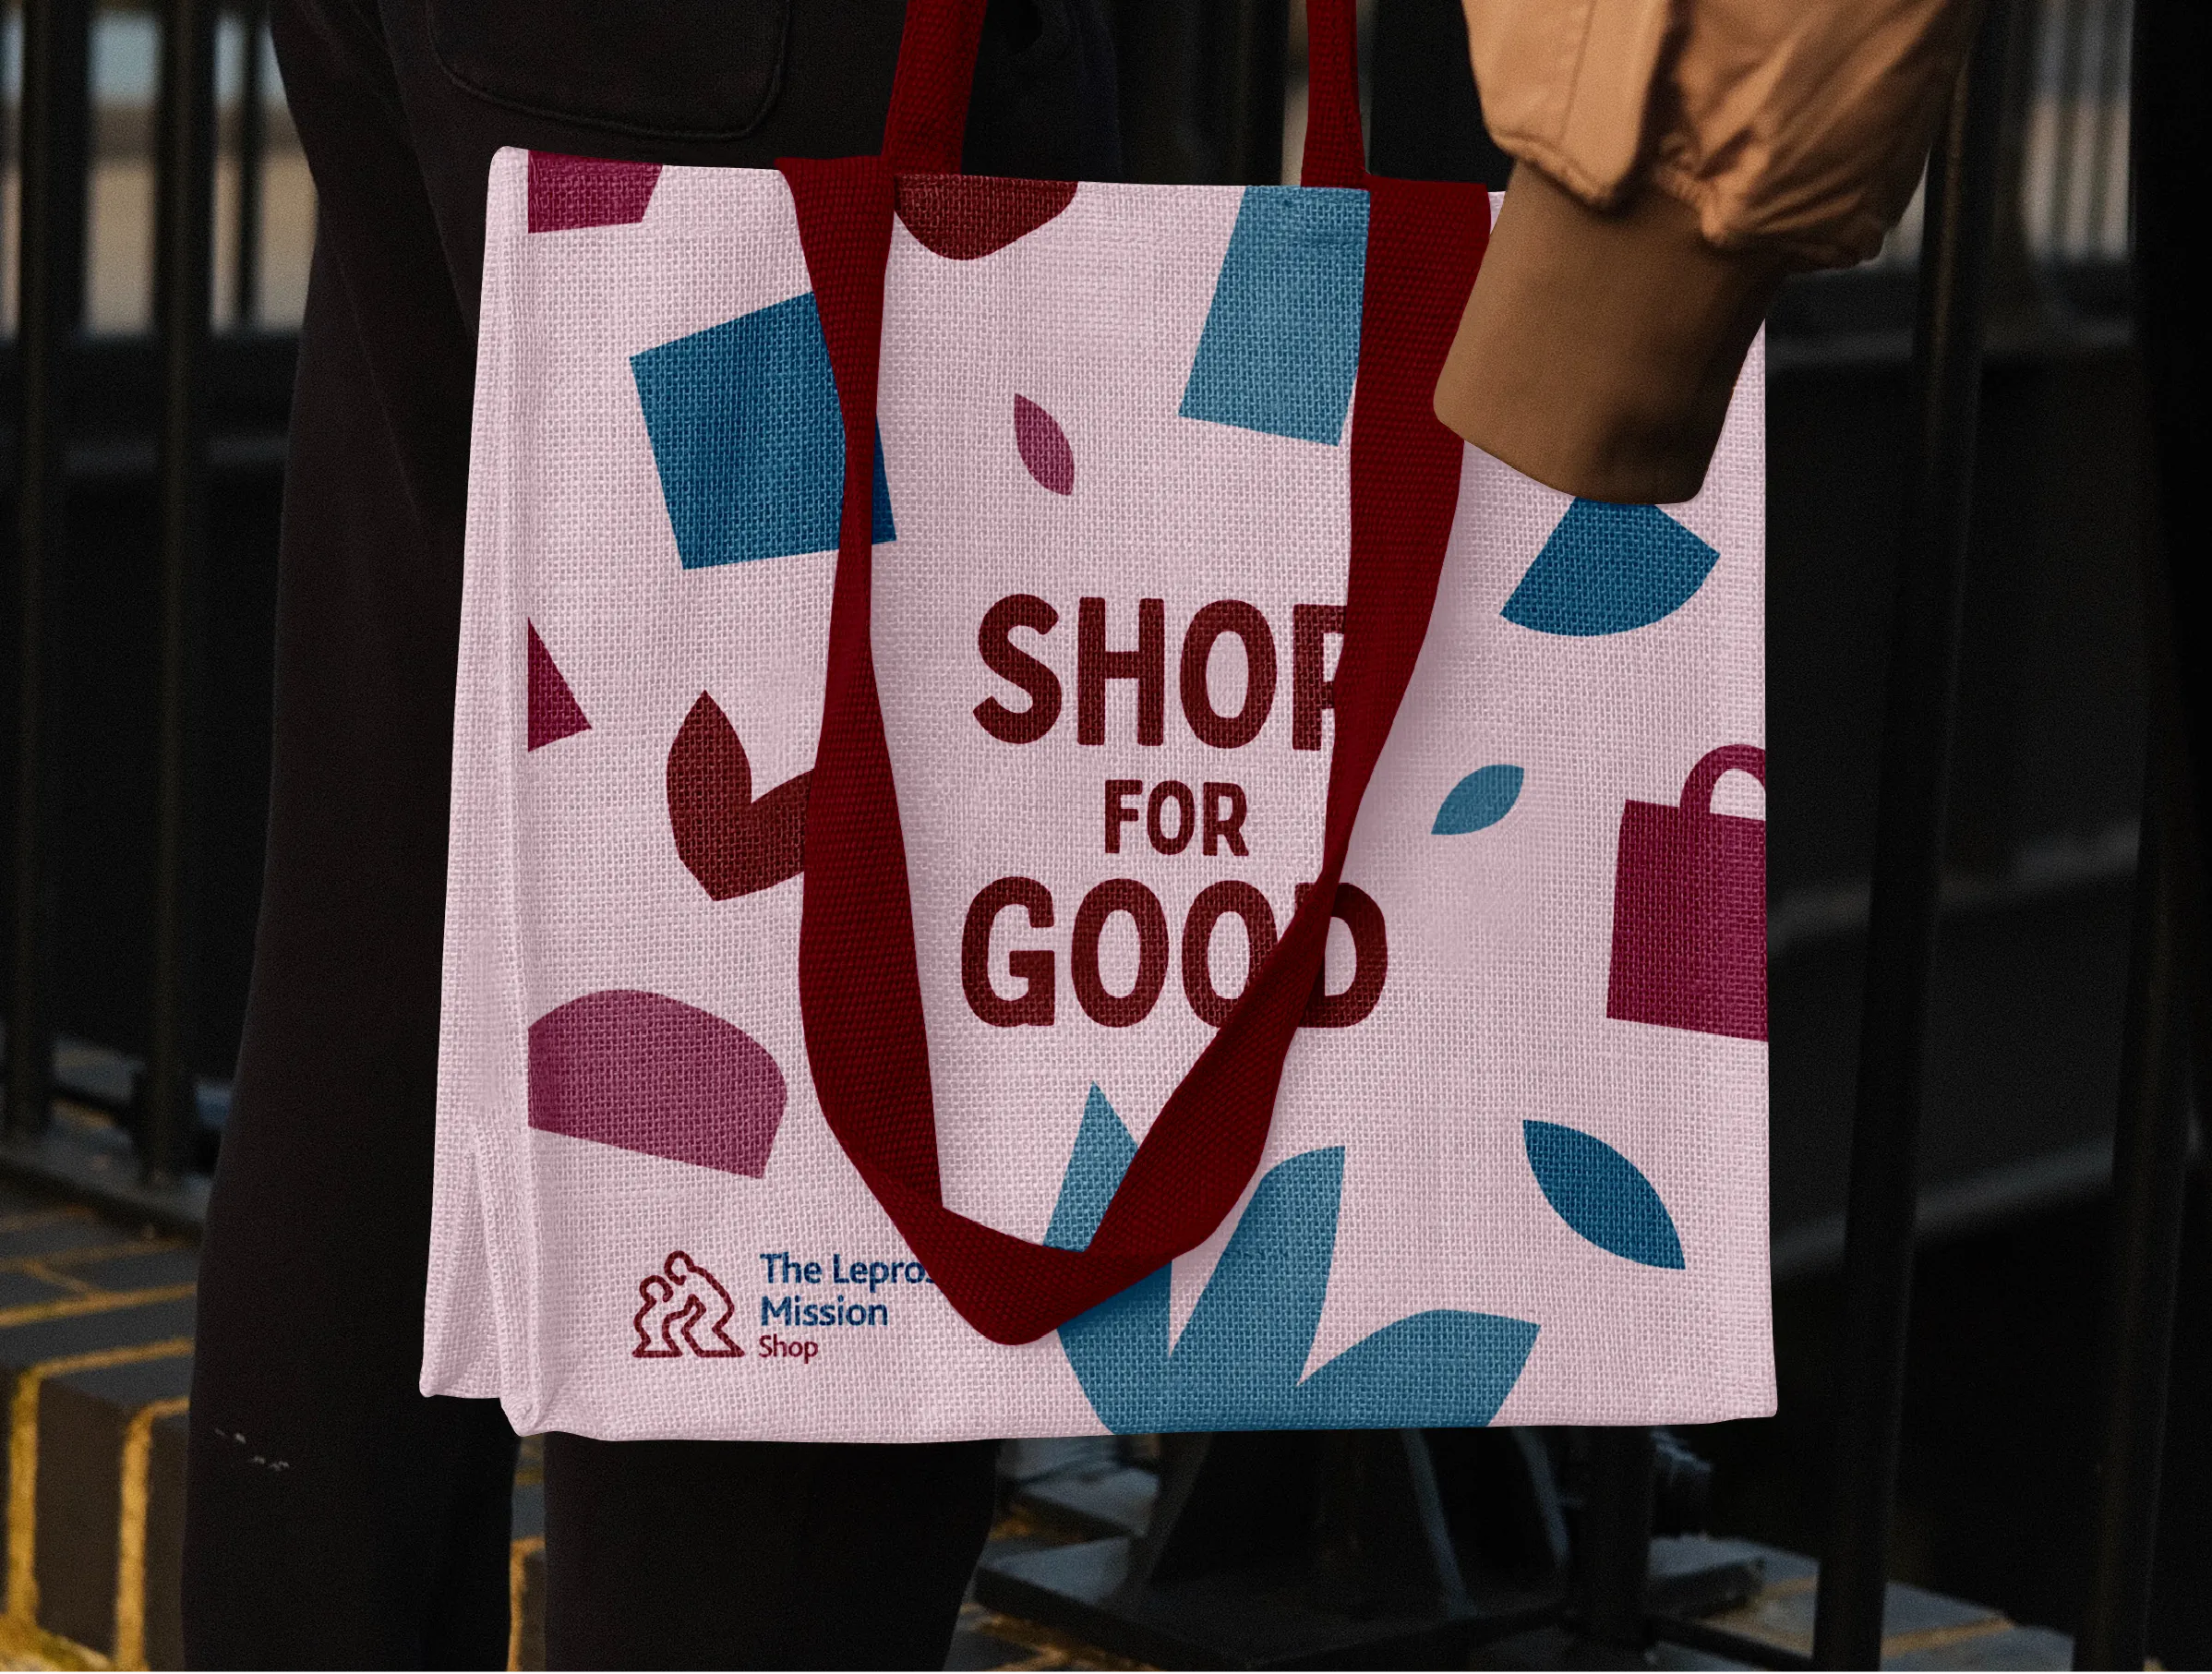 A canvas tote bag in new Leprosy Mission Shop branding with the slogan "Shop For Good"